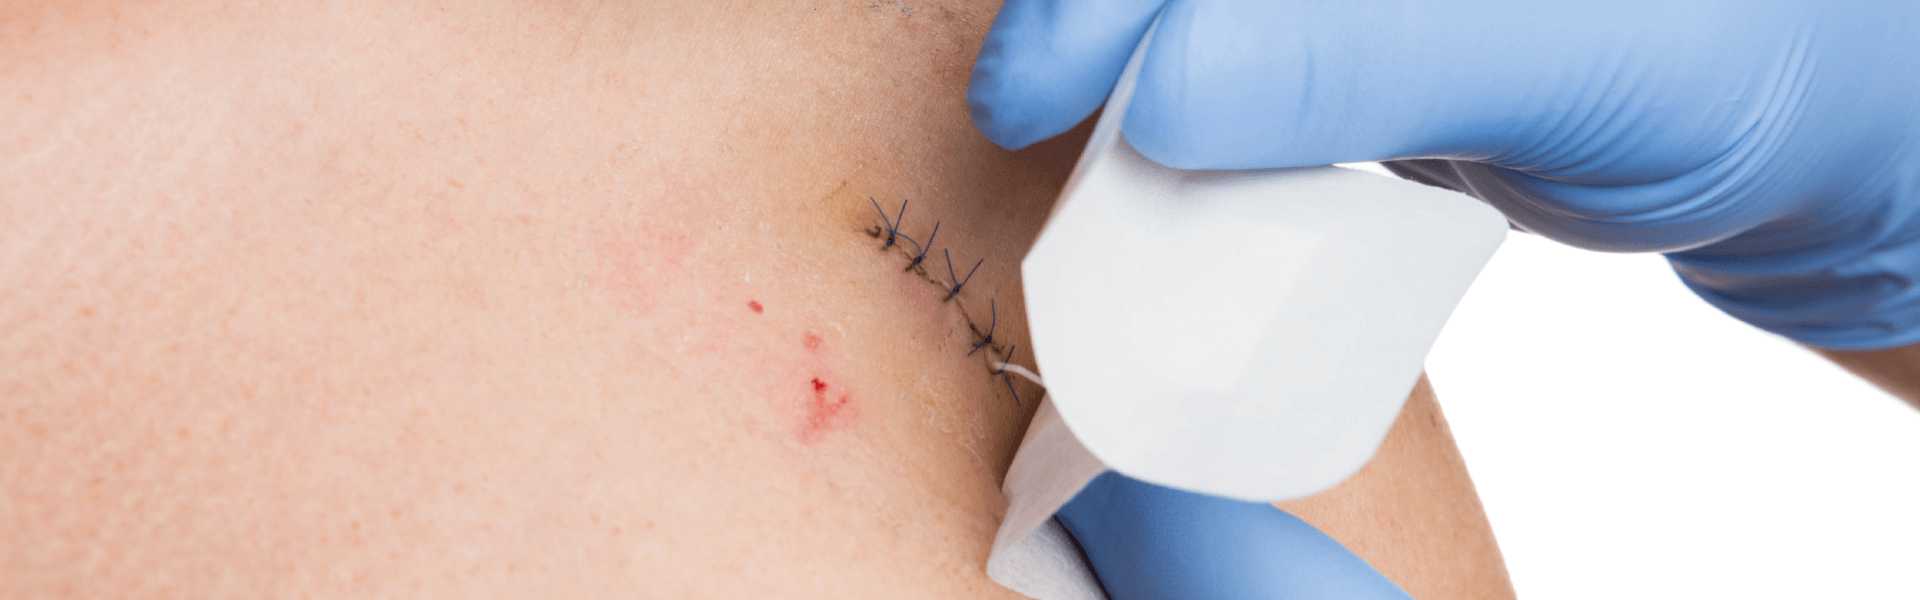 Suture Removal in Baner, Pune